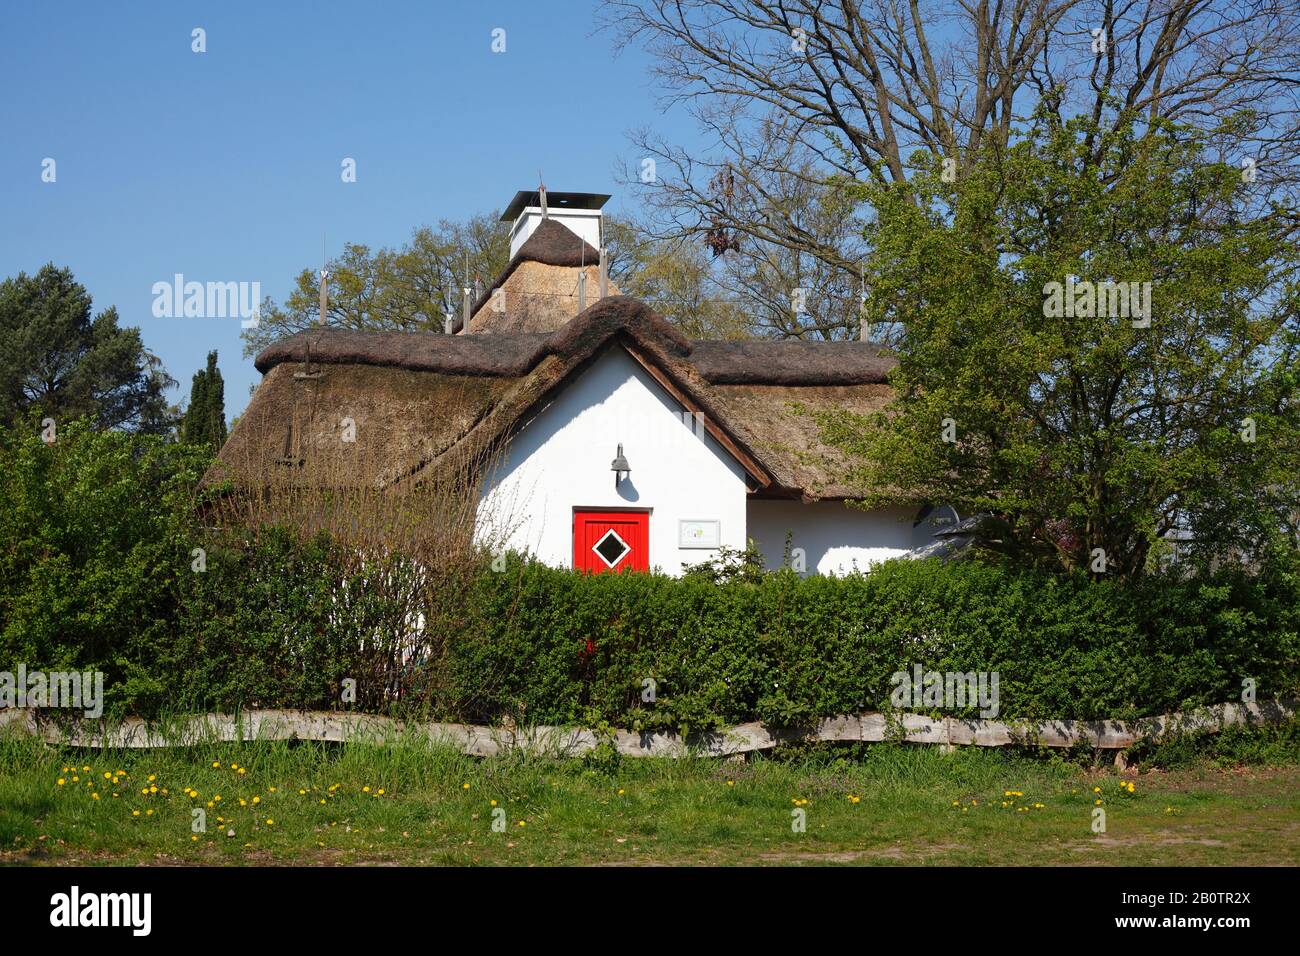 Modern thatched residential building, single family house, Fischerhude, Lower Saxony, Germany, Europe Stock Photo